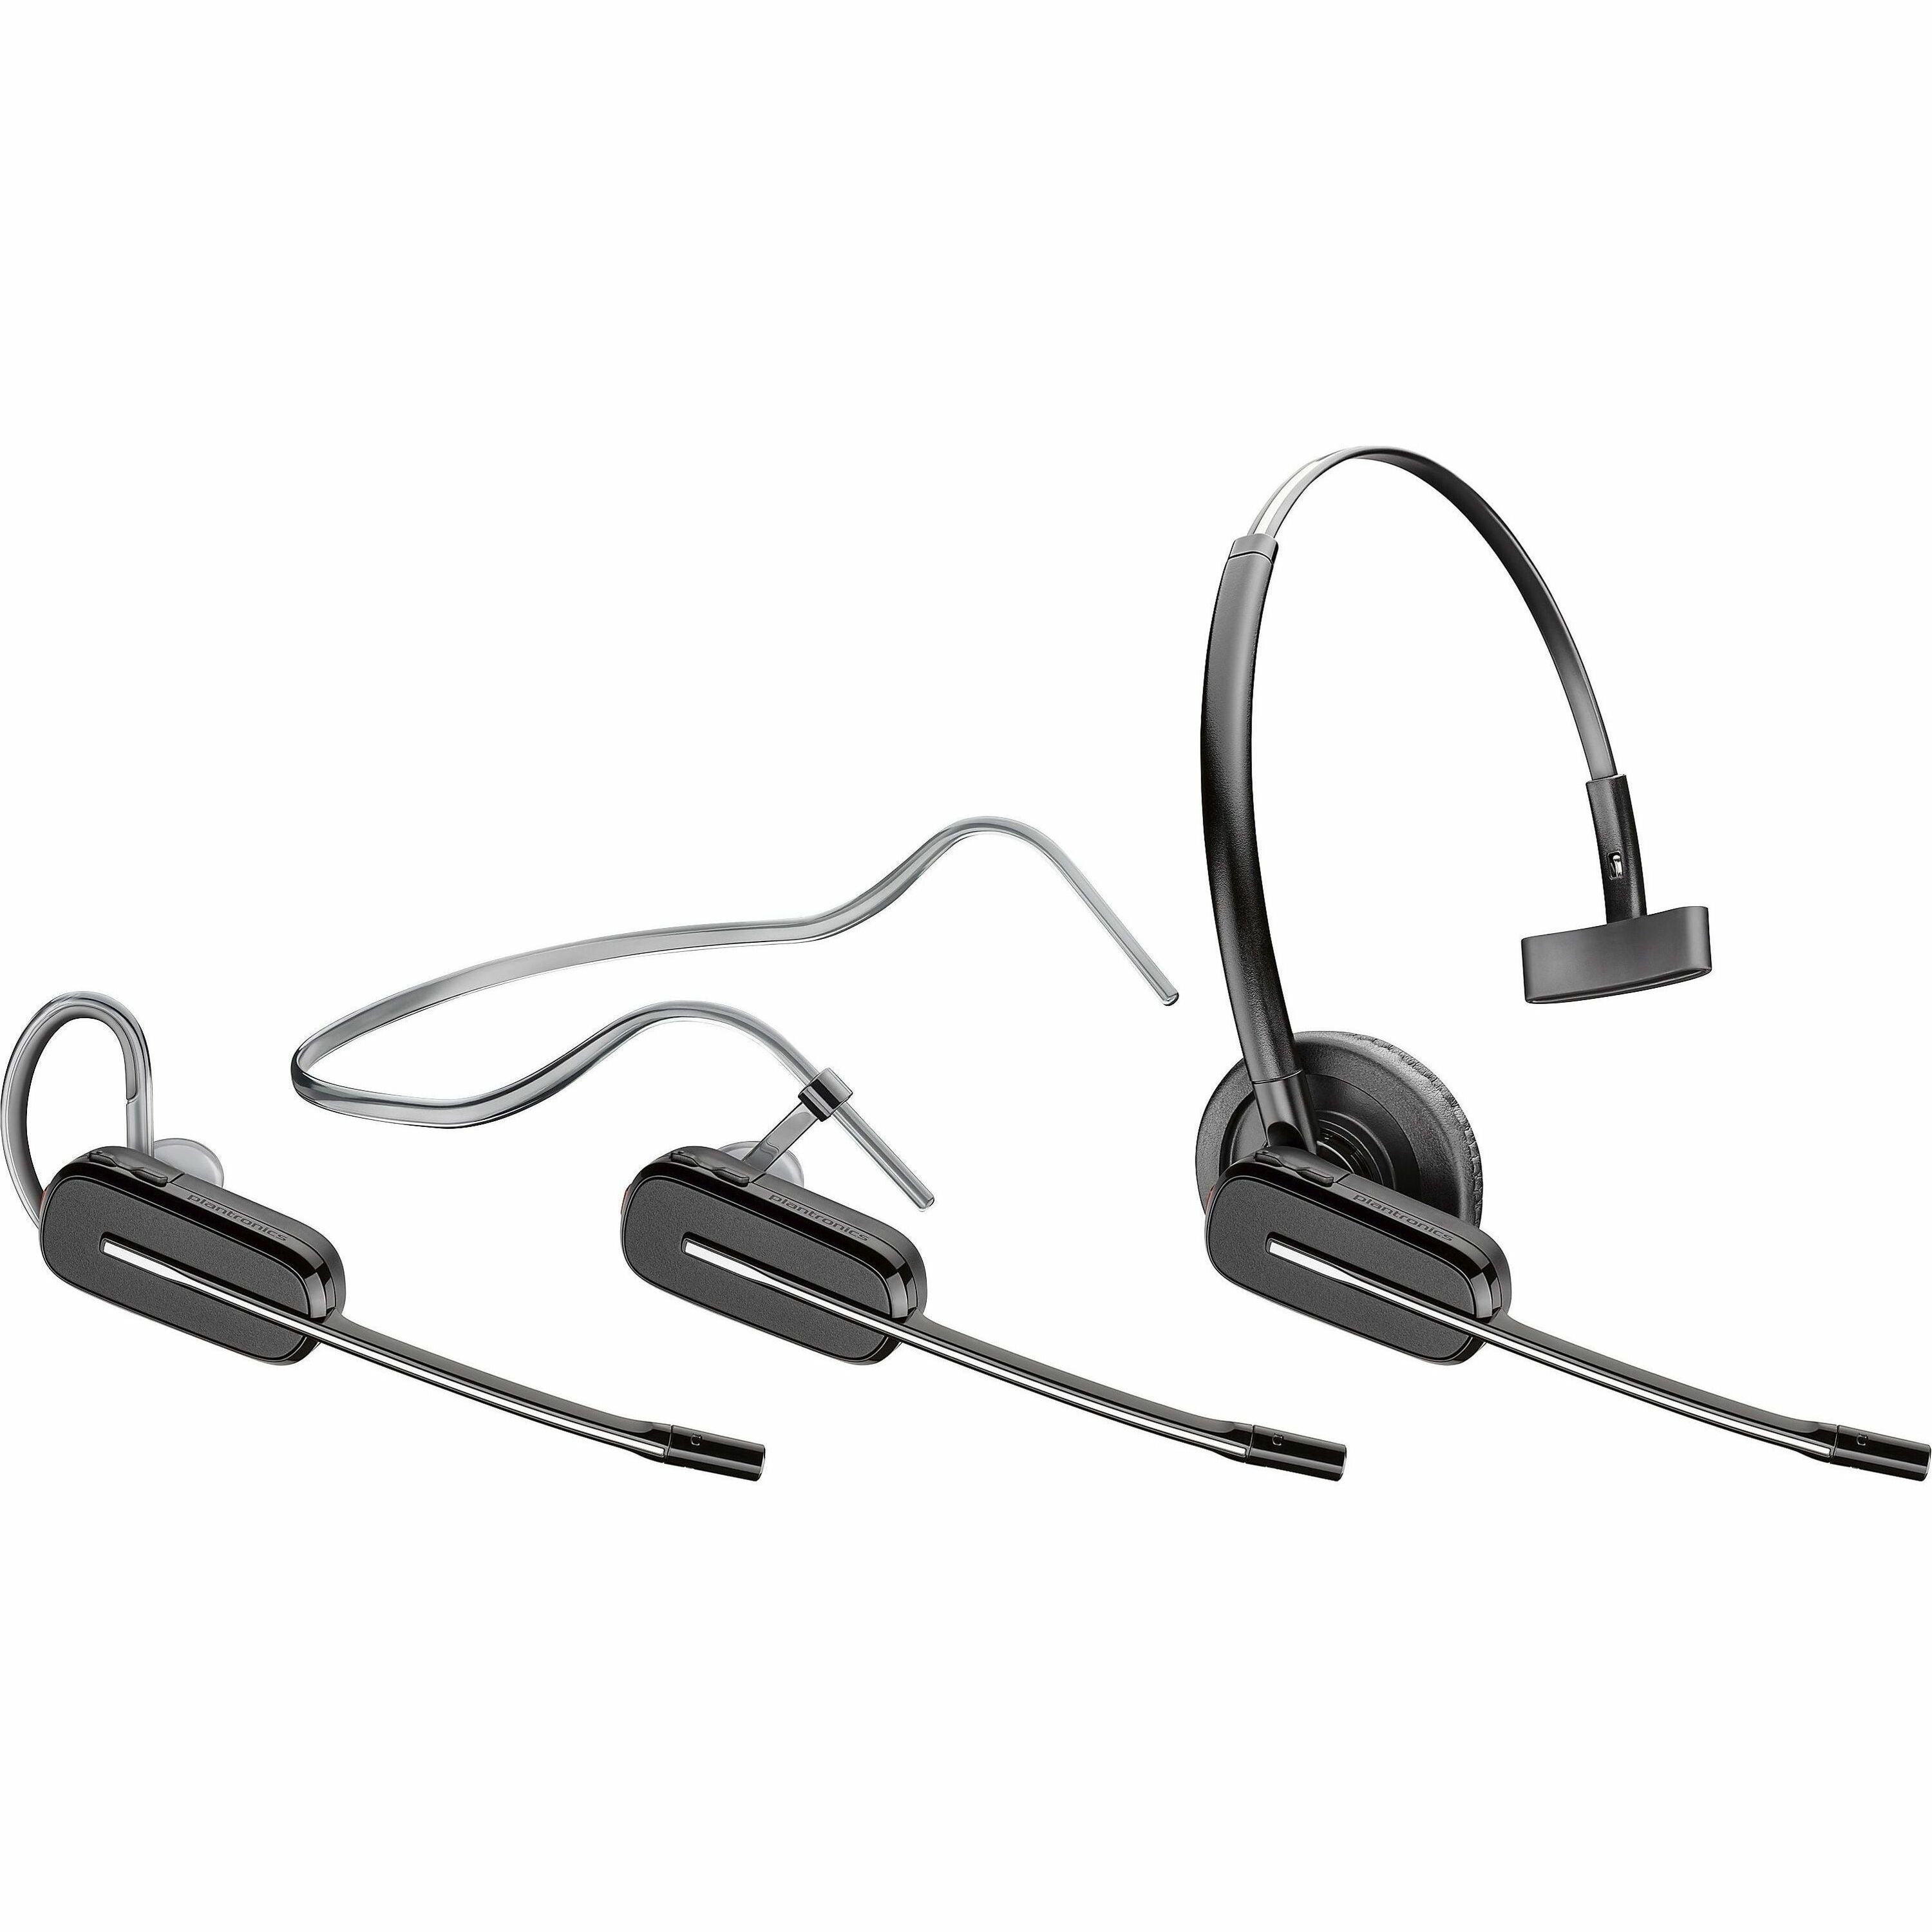 poly-savi-8240-convertible-office-headset-mono-wireless-bluetooth-dect-590-ft-32-ohm-20-hz-20-khz-on-ear-monaural-in-ear-noise-cancelling-microphone-black-taa-compliant_hew7w071aa - 1